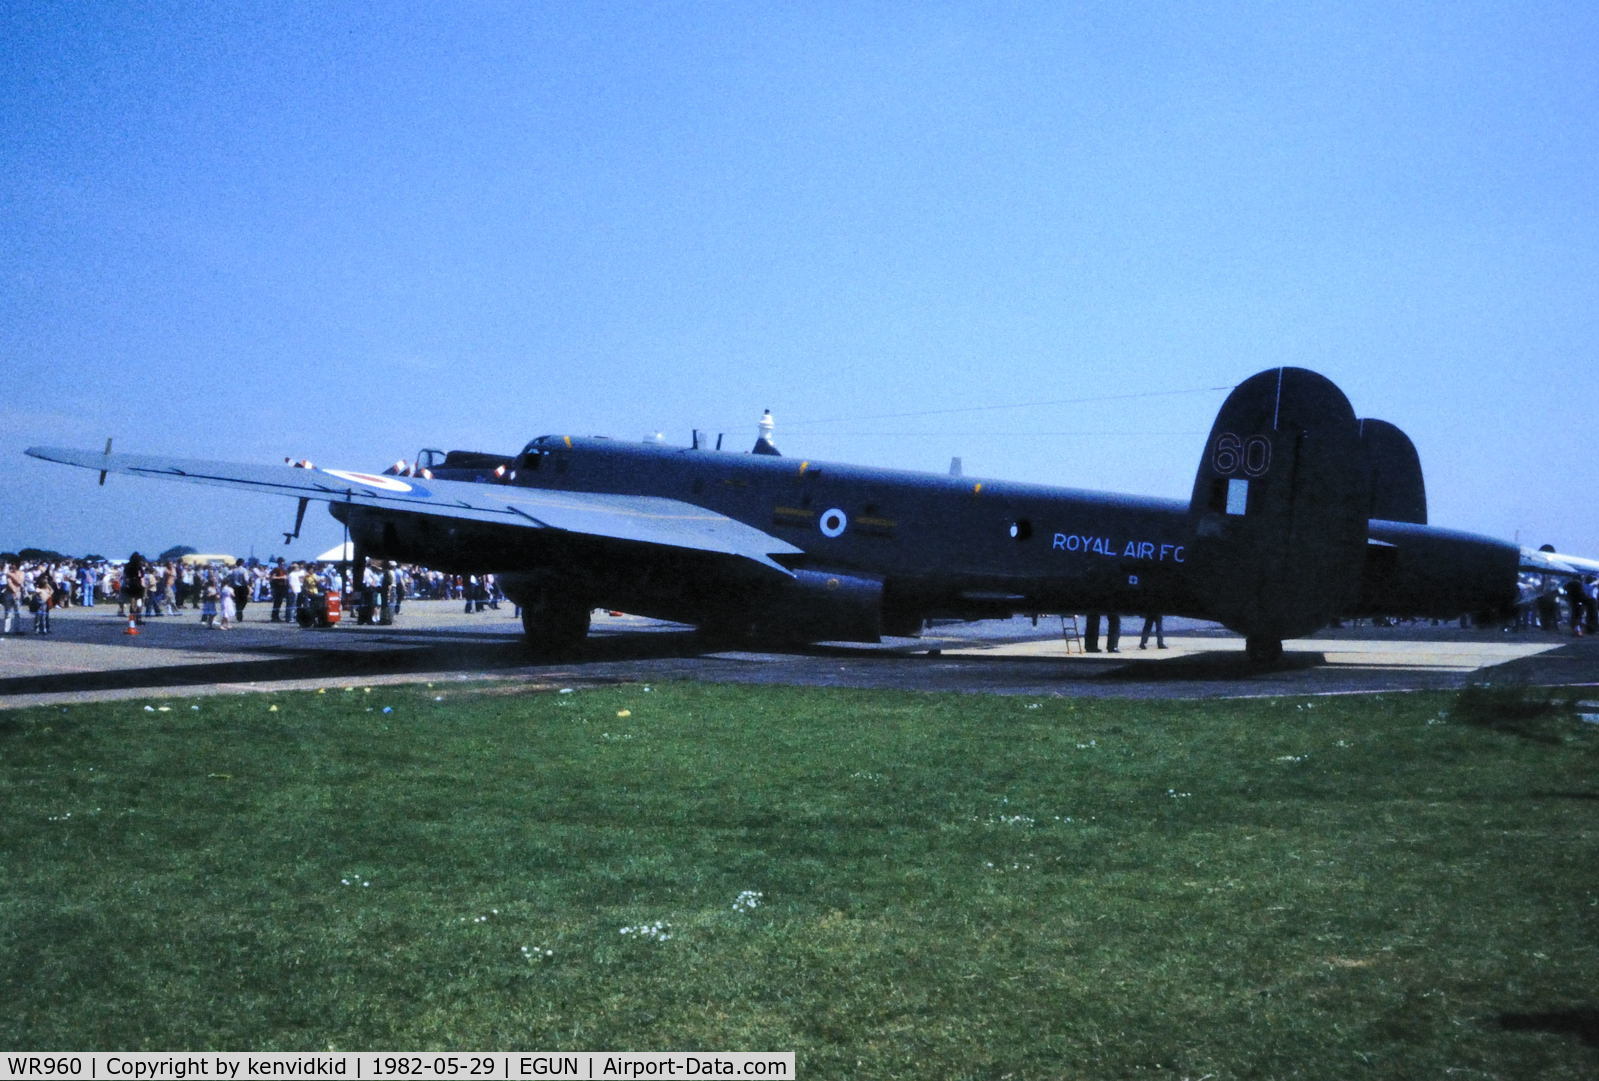 WR960, 1954 Avro 716 Shackleton AEW.2 C/N Not found WR960, At the 1982 Mildenhall Air Fete.